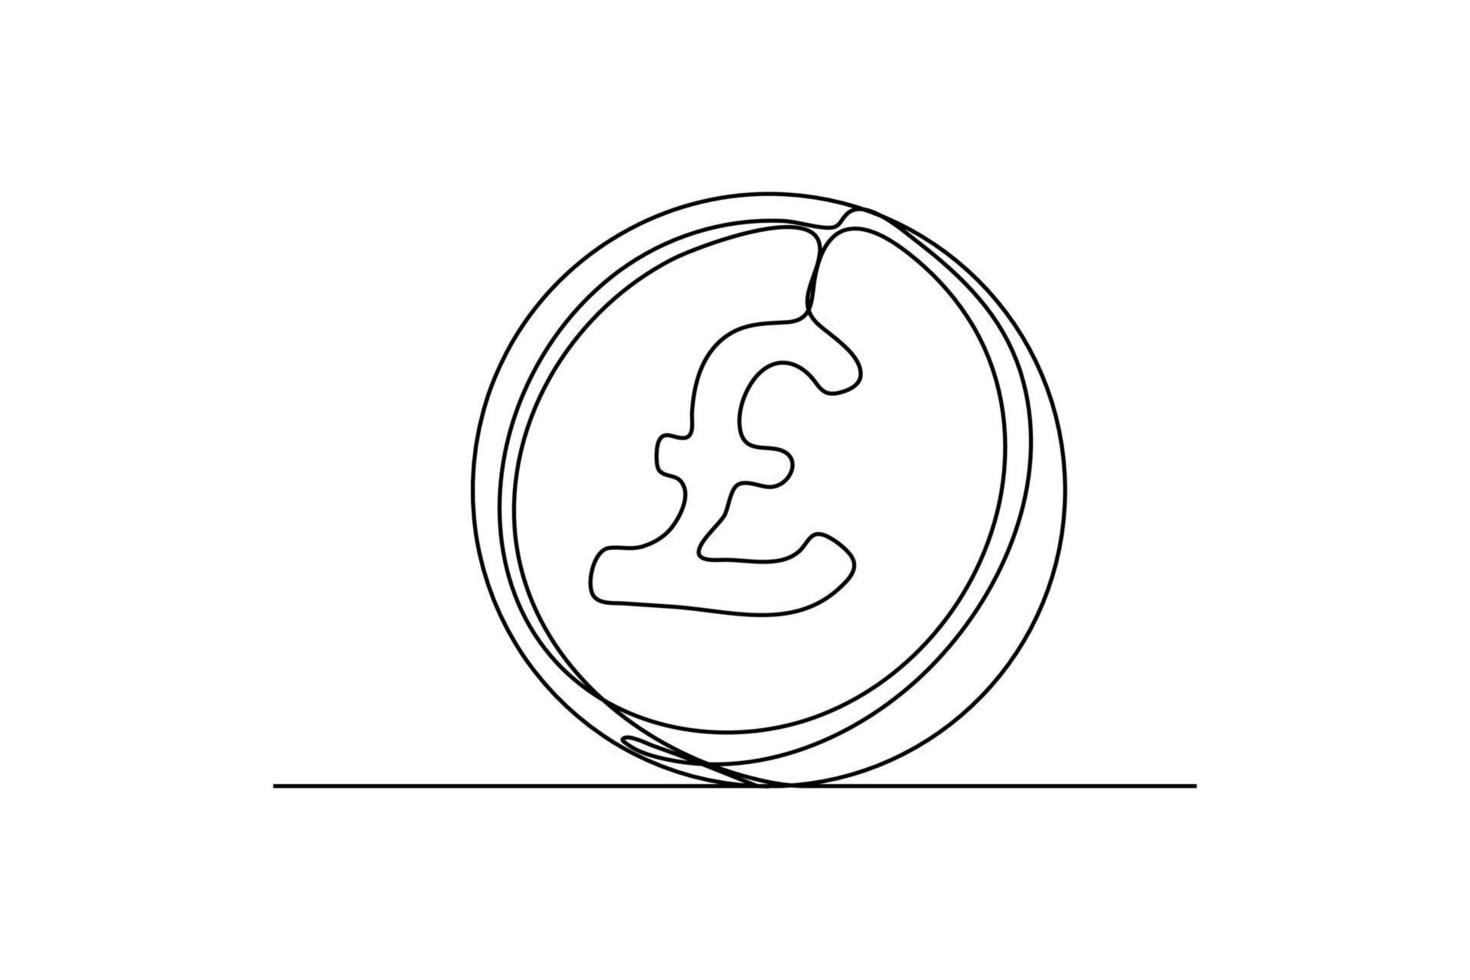 Continuous one-line drawing a pound coin currency. Country currency concept. Single line drawing design graphic vector illustration